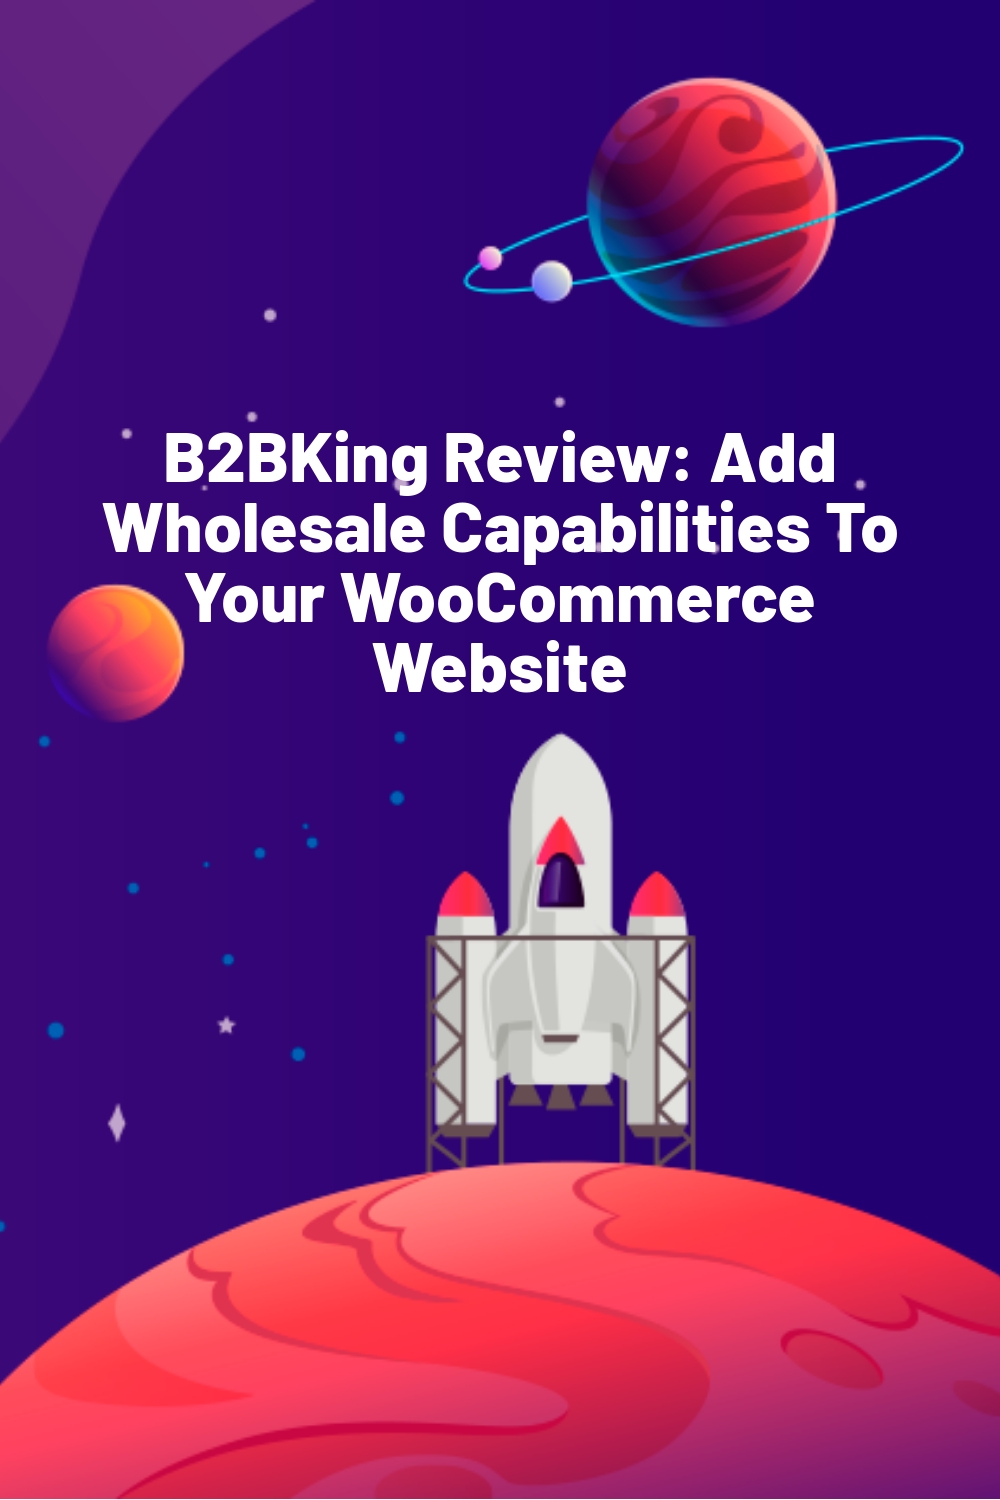 B2BKing Review: Add Wholesale Capabilities To Your WooCommerce Website